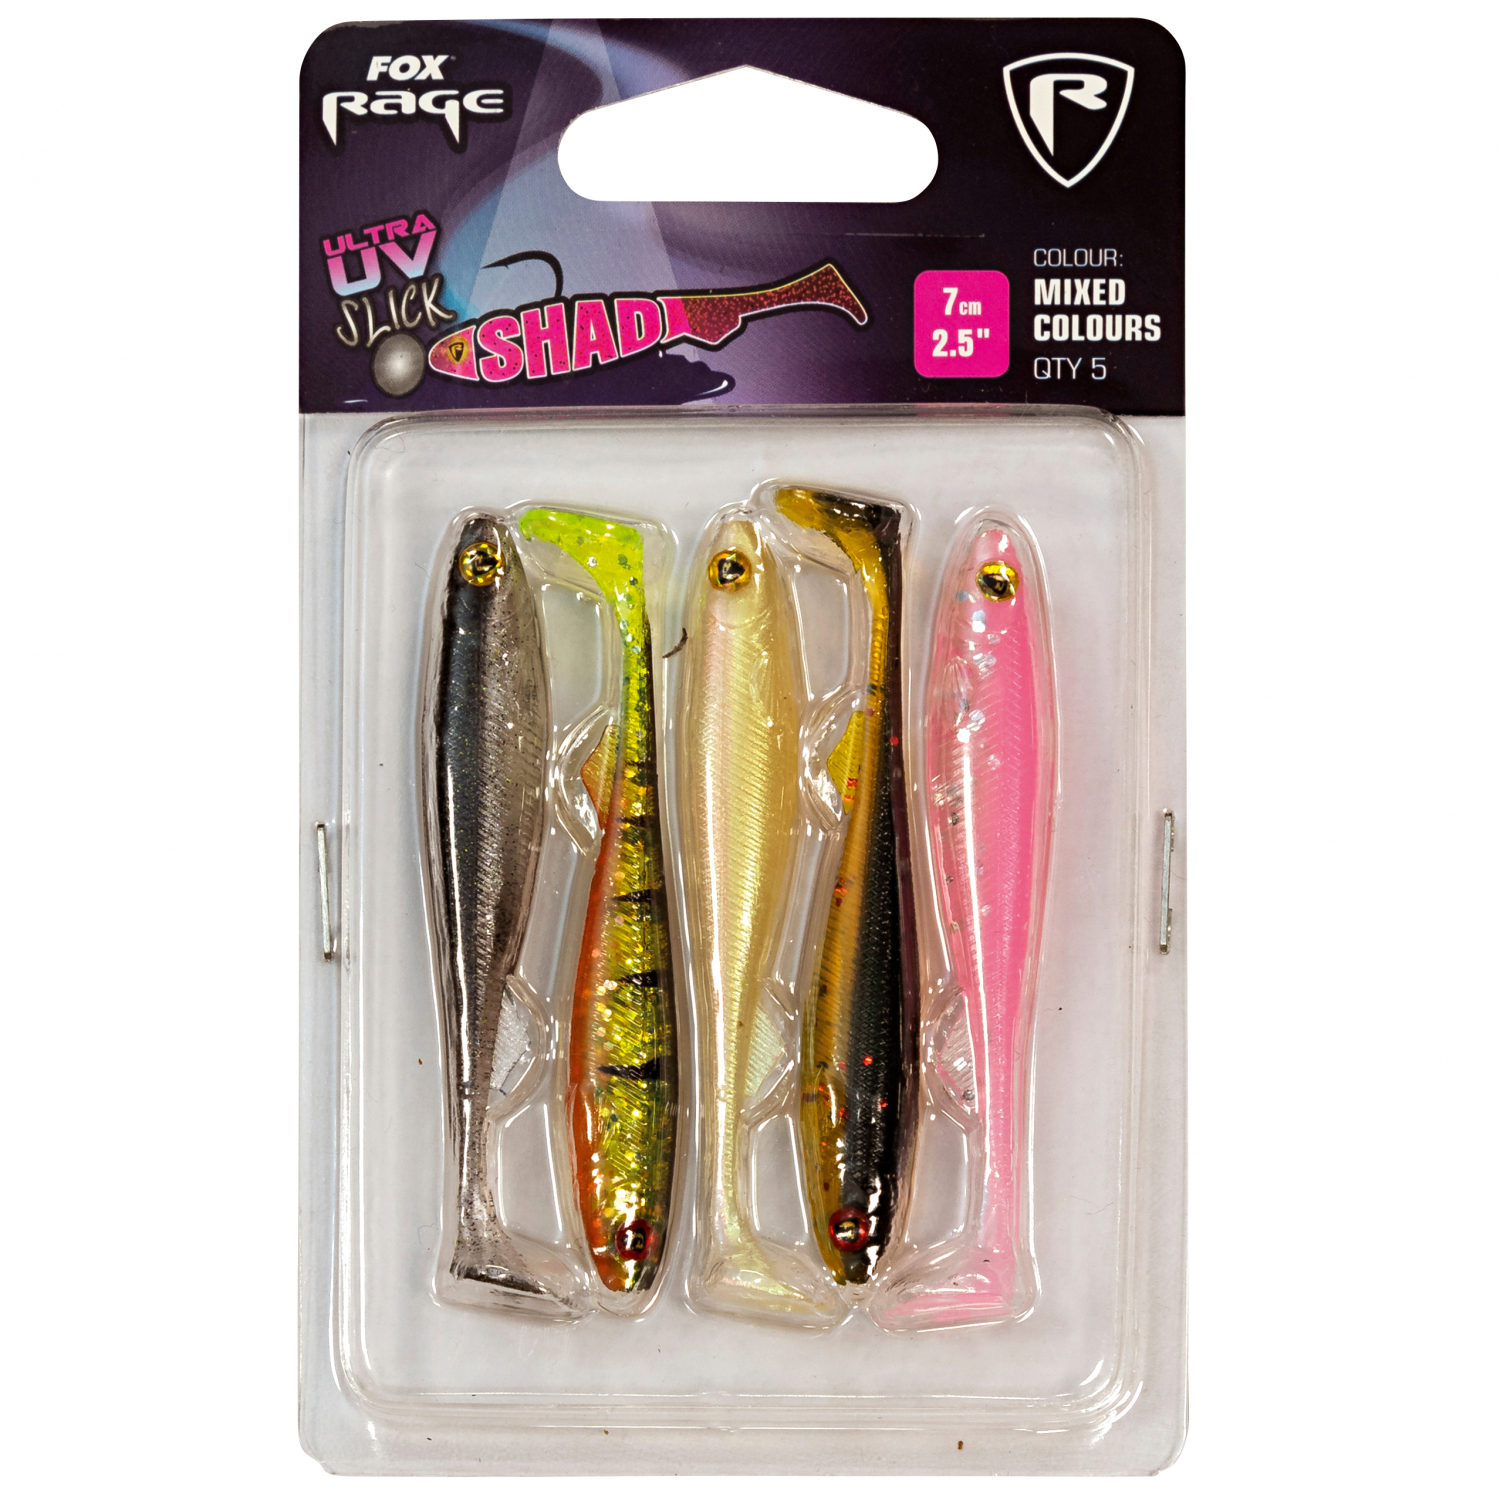 Fox Rage Lure Packs Ultra UV Slick Shad Loaded at low prices